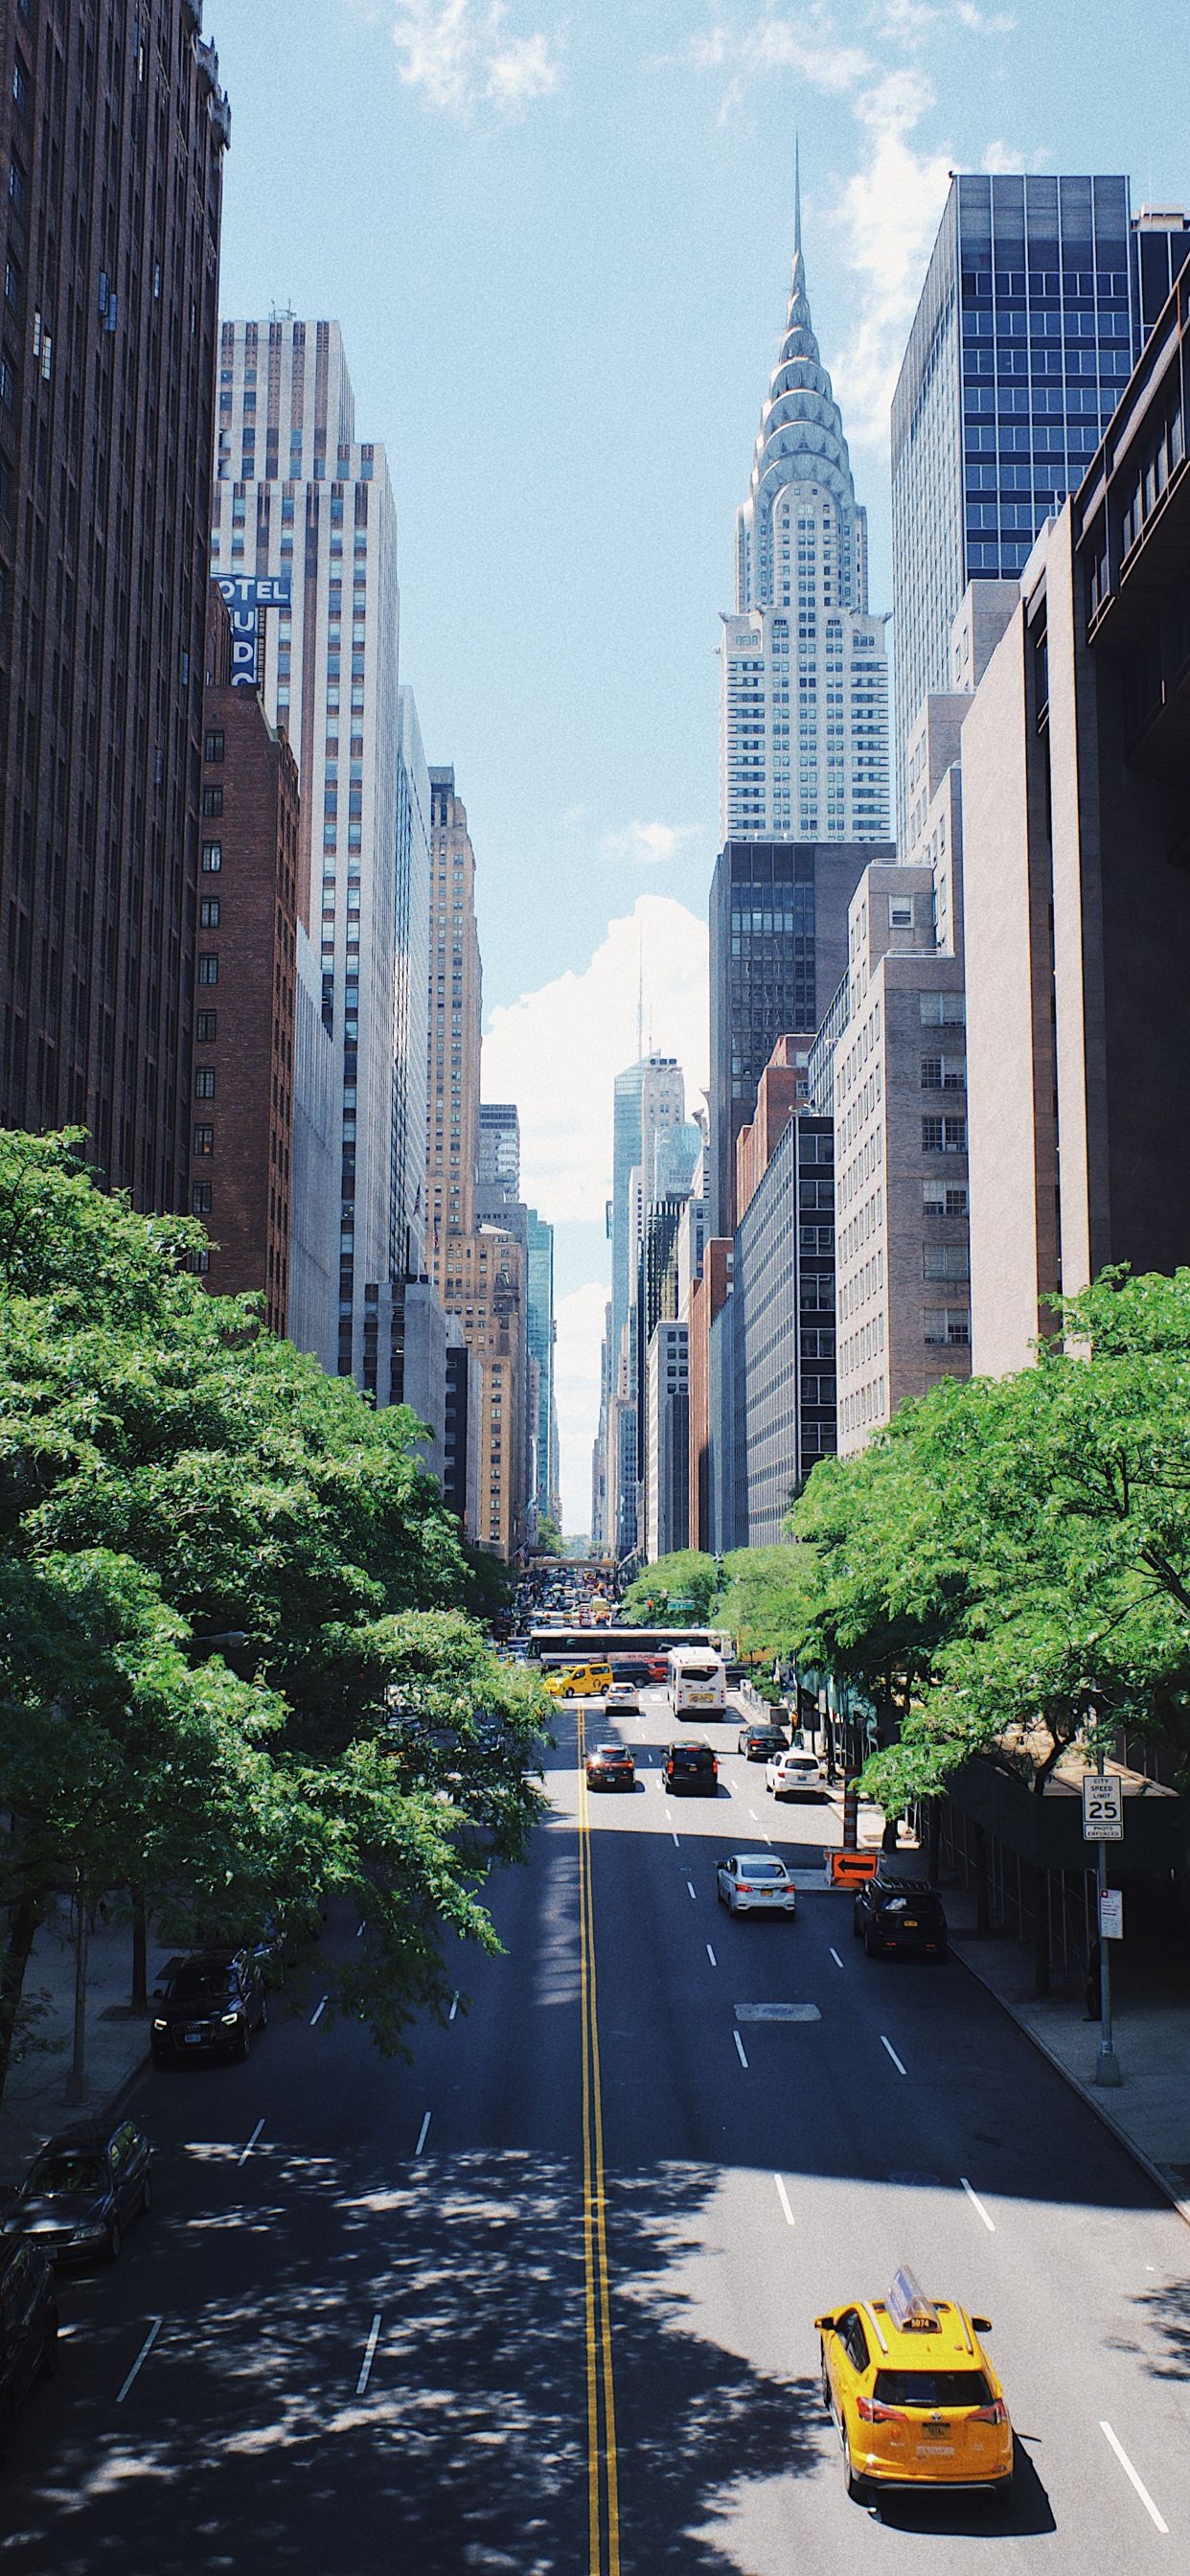 New York Streets, NYC iPhone wallpapers, Cityscapes on your screen, Big Apple vibes, 1250x2690 HD Handy